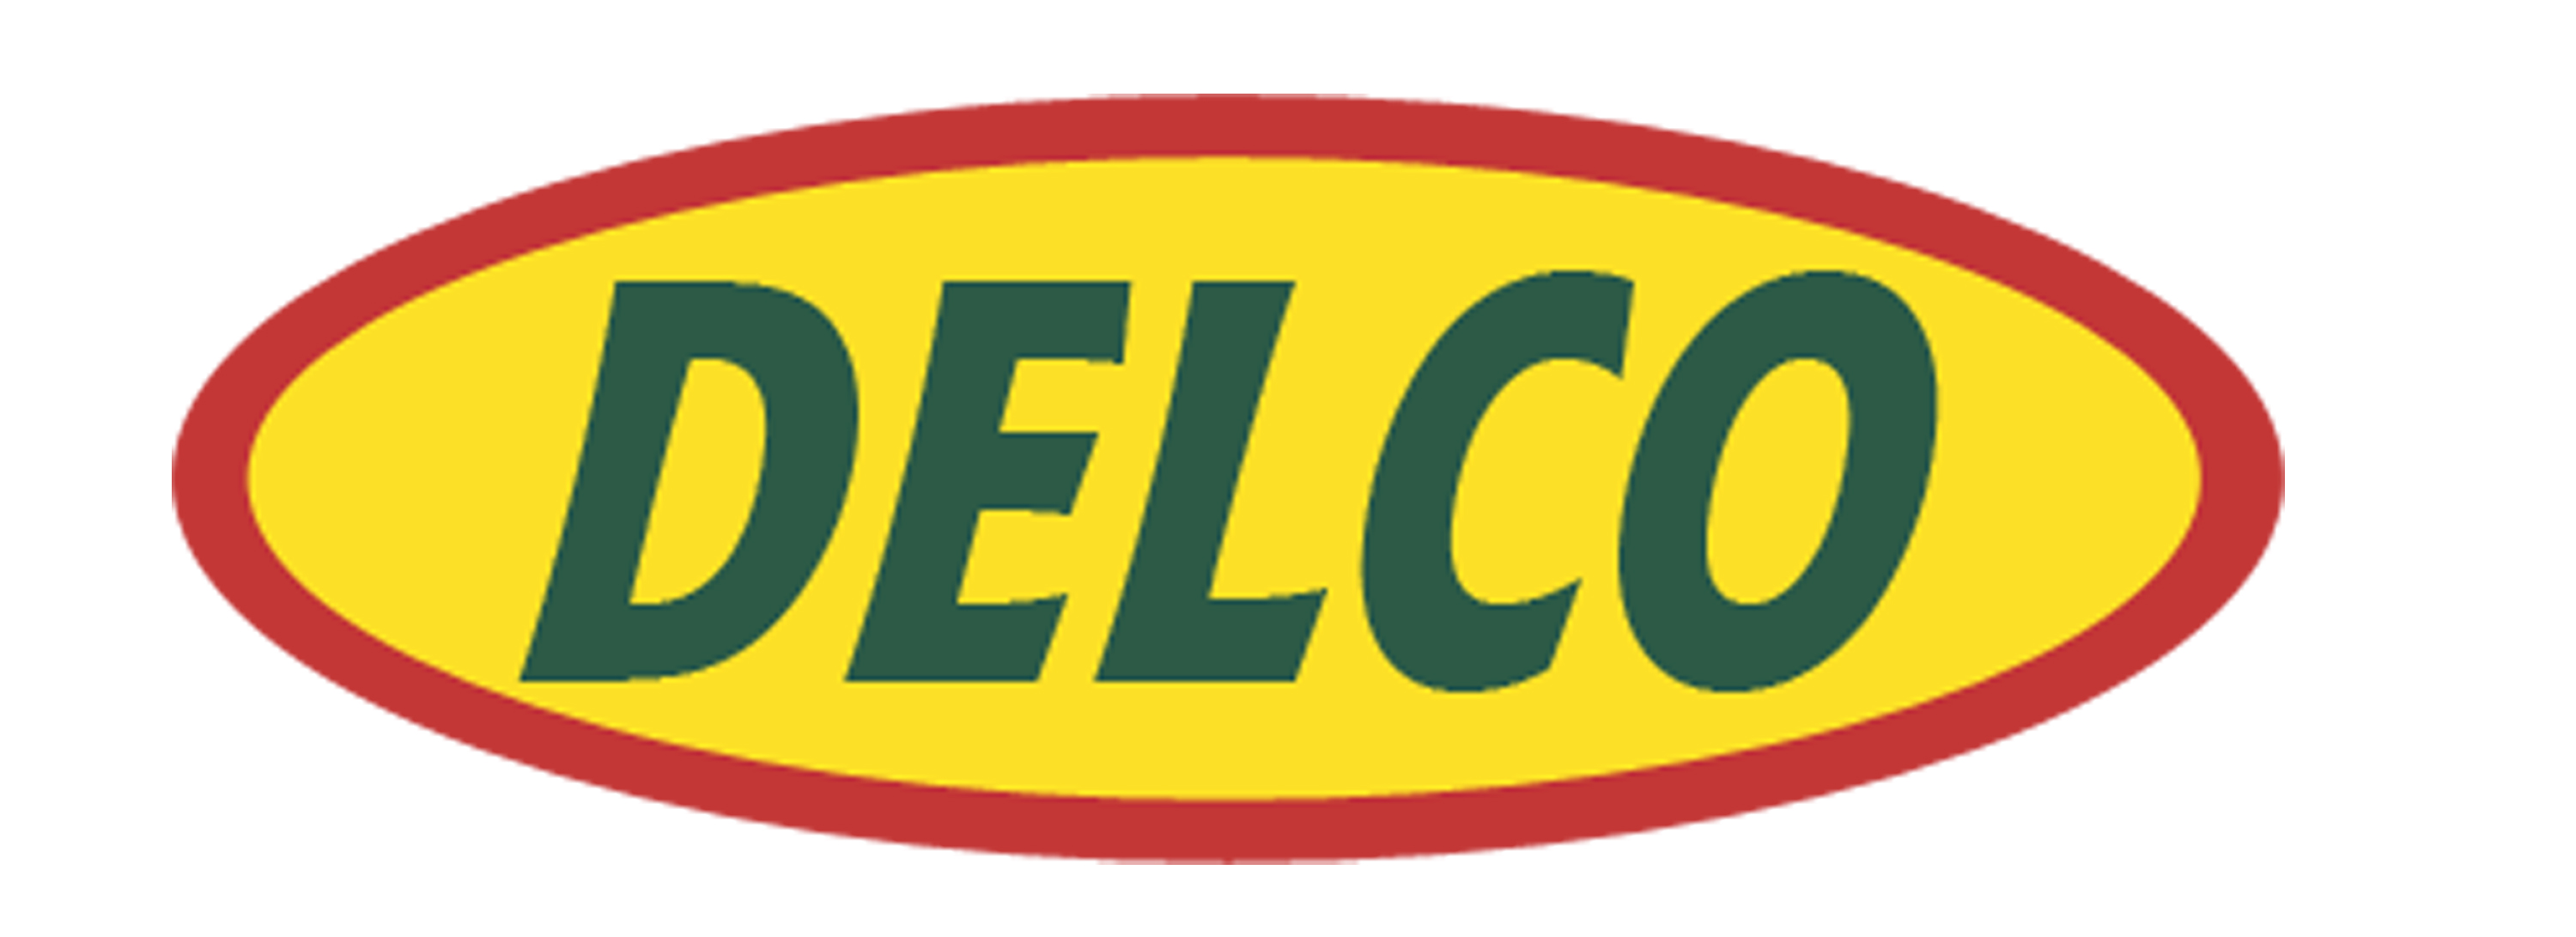 delco forest products